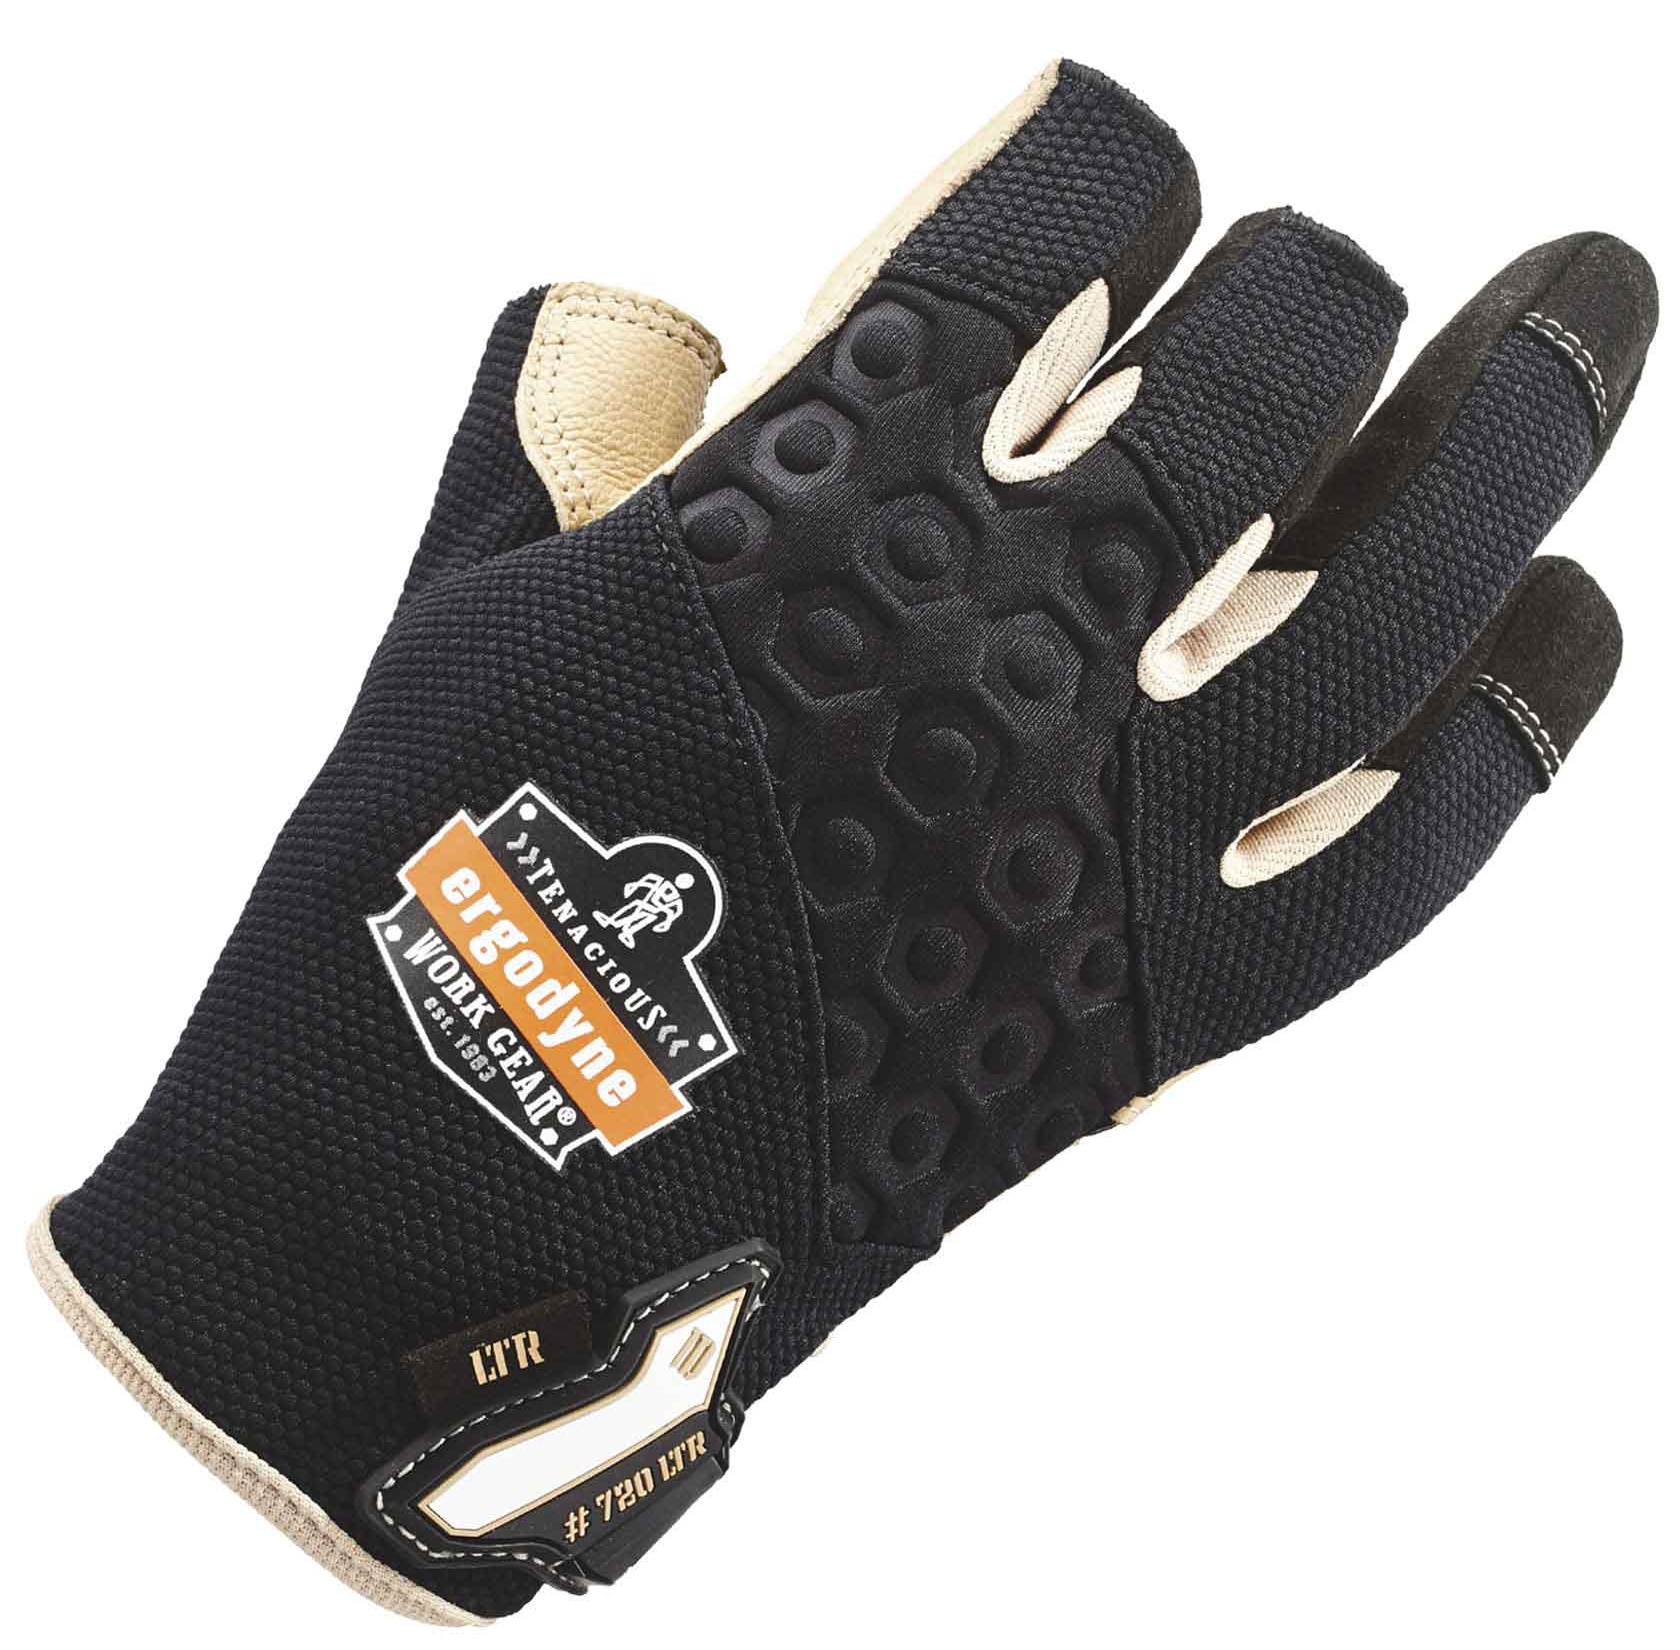 Ergodyne ProFlex 720LTR Heavy-Duty Leather-Reinforced Framing Gloves from Columbia Safety